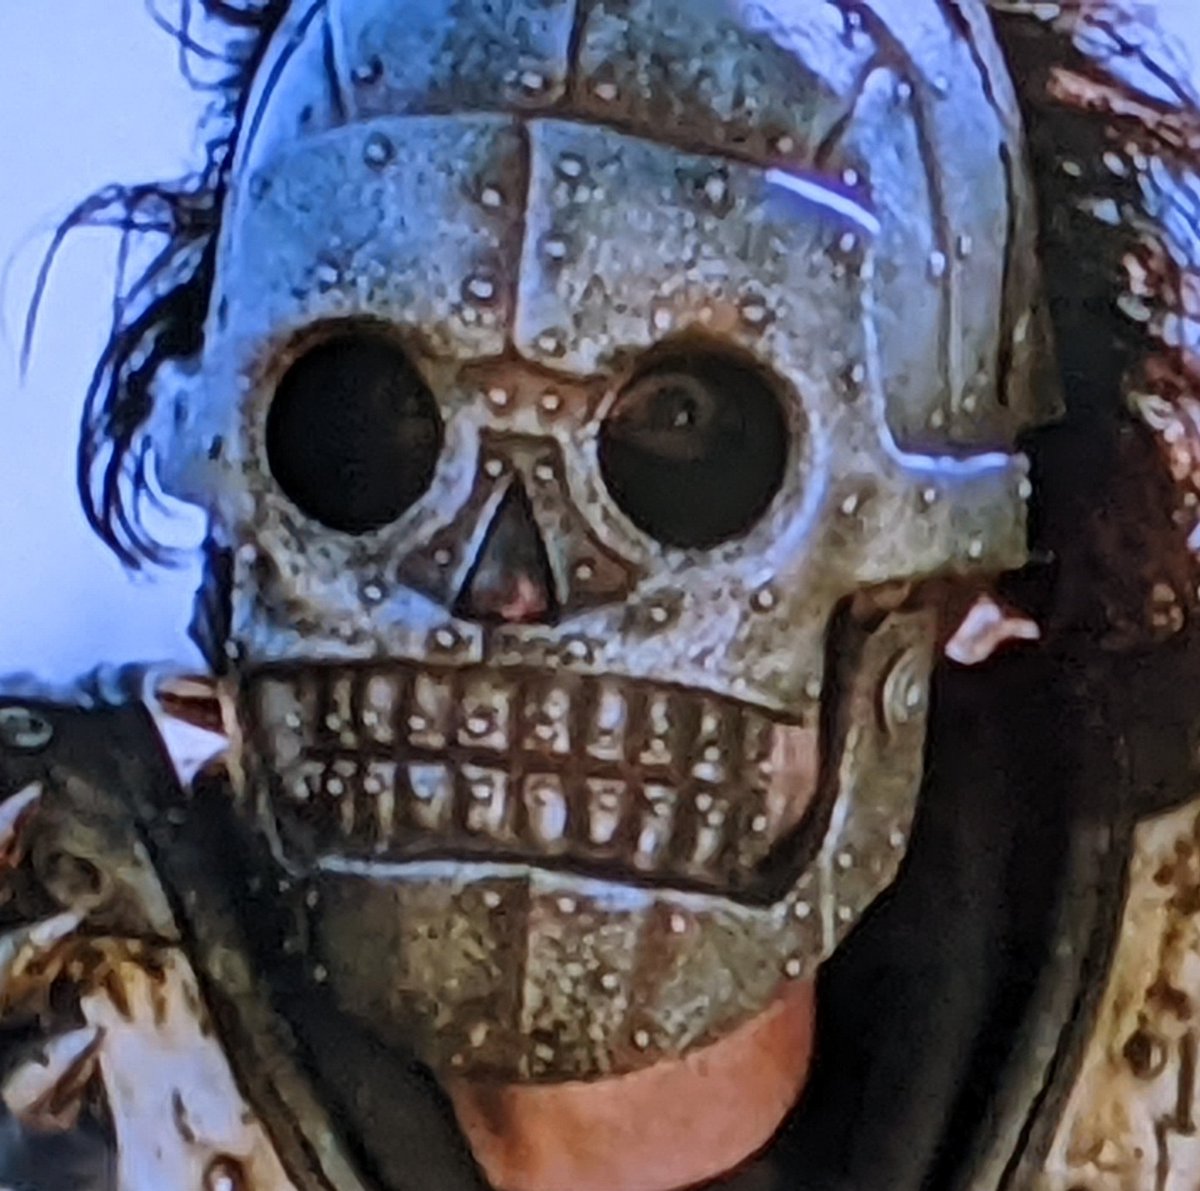 I propose we switch to these as the masks of choice for 2022.
#MutantDriveIn
#Turbokid